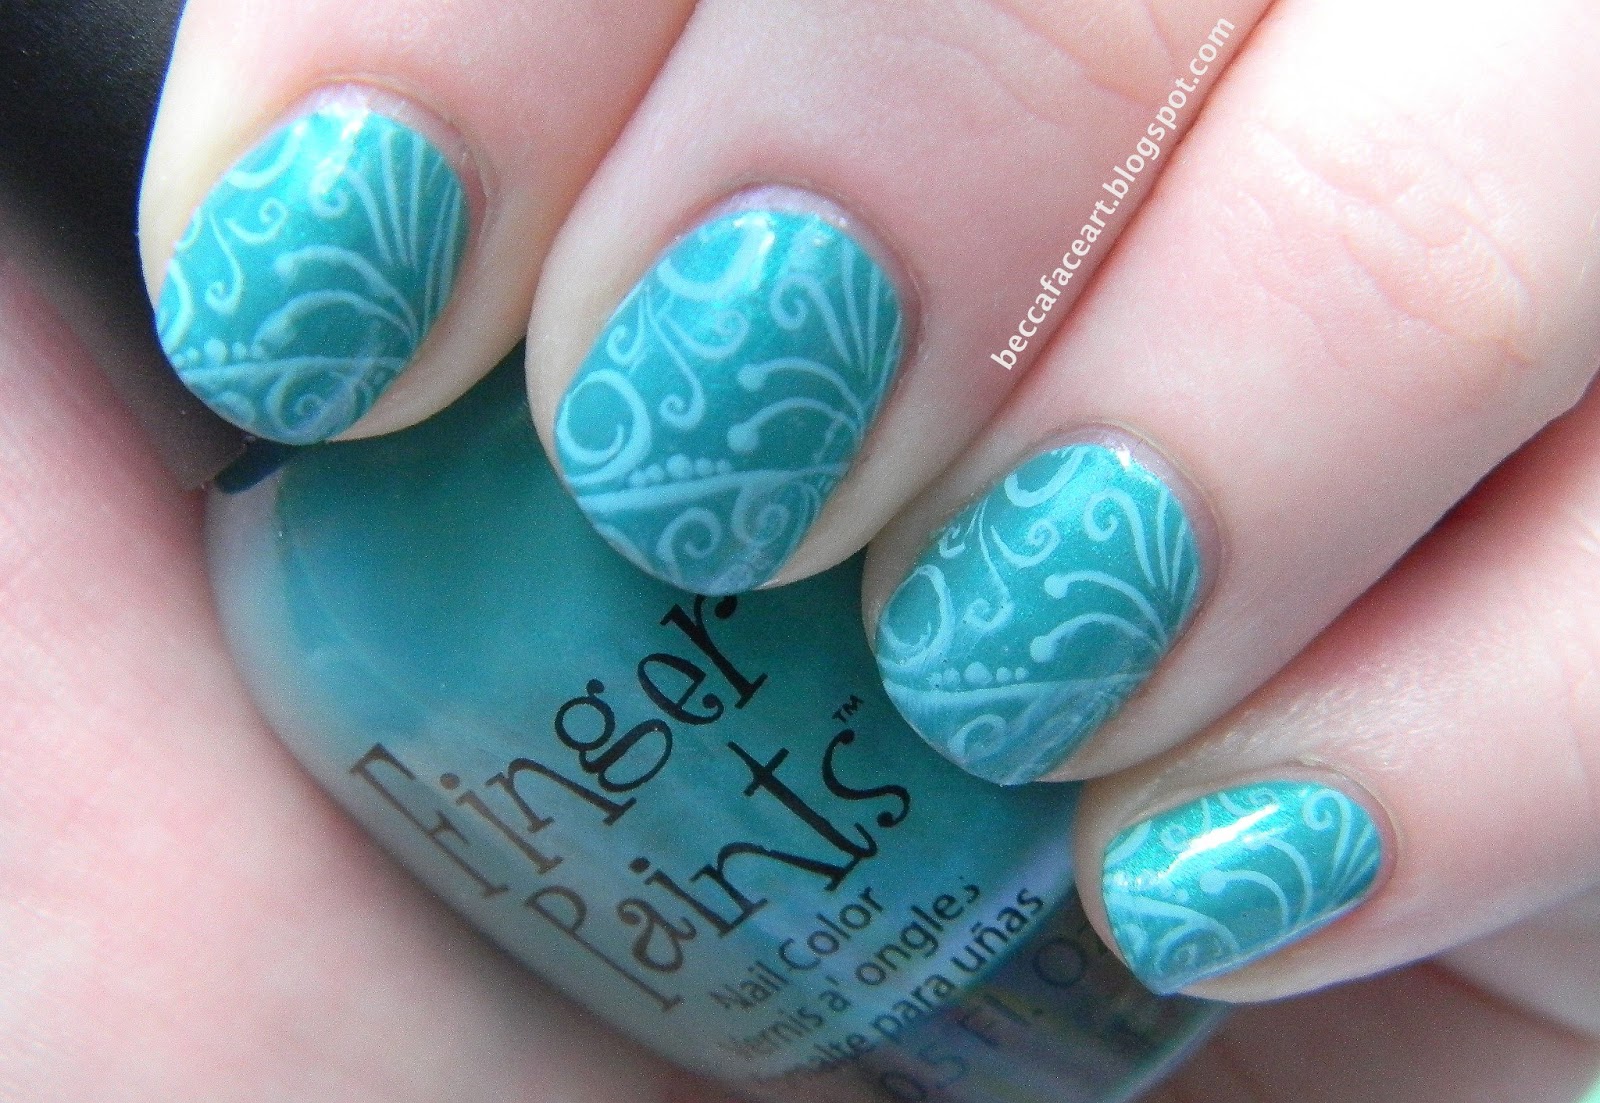 Becca Face Nail Art: Turquoise and Teal Swirl Nails